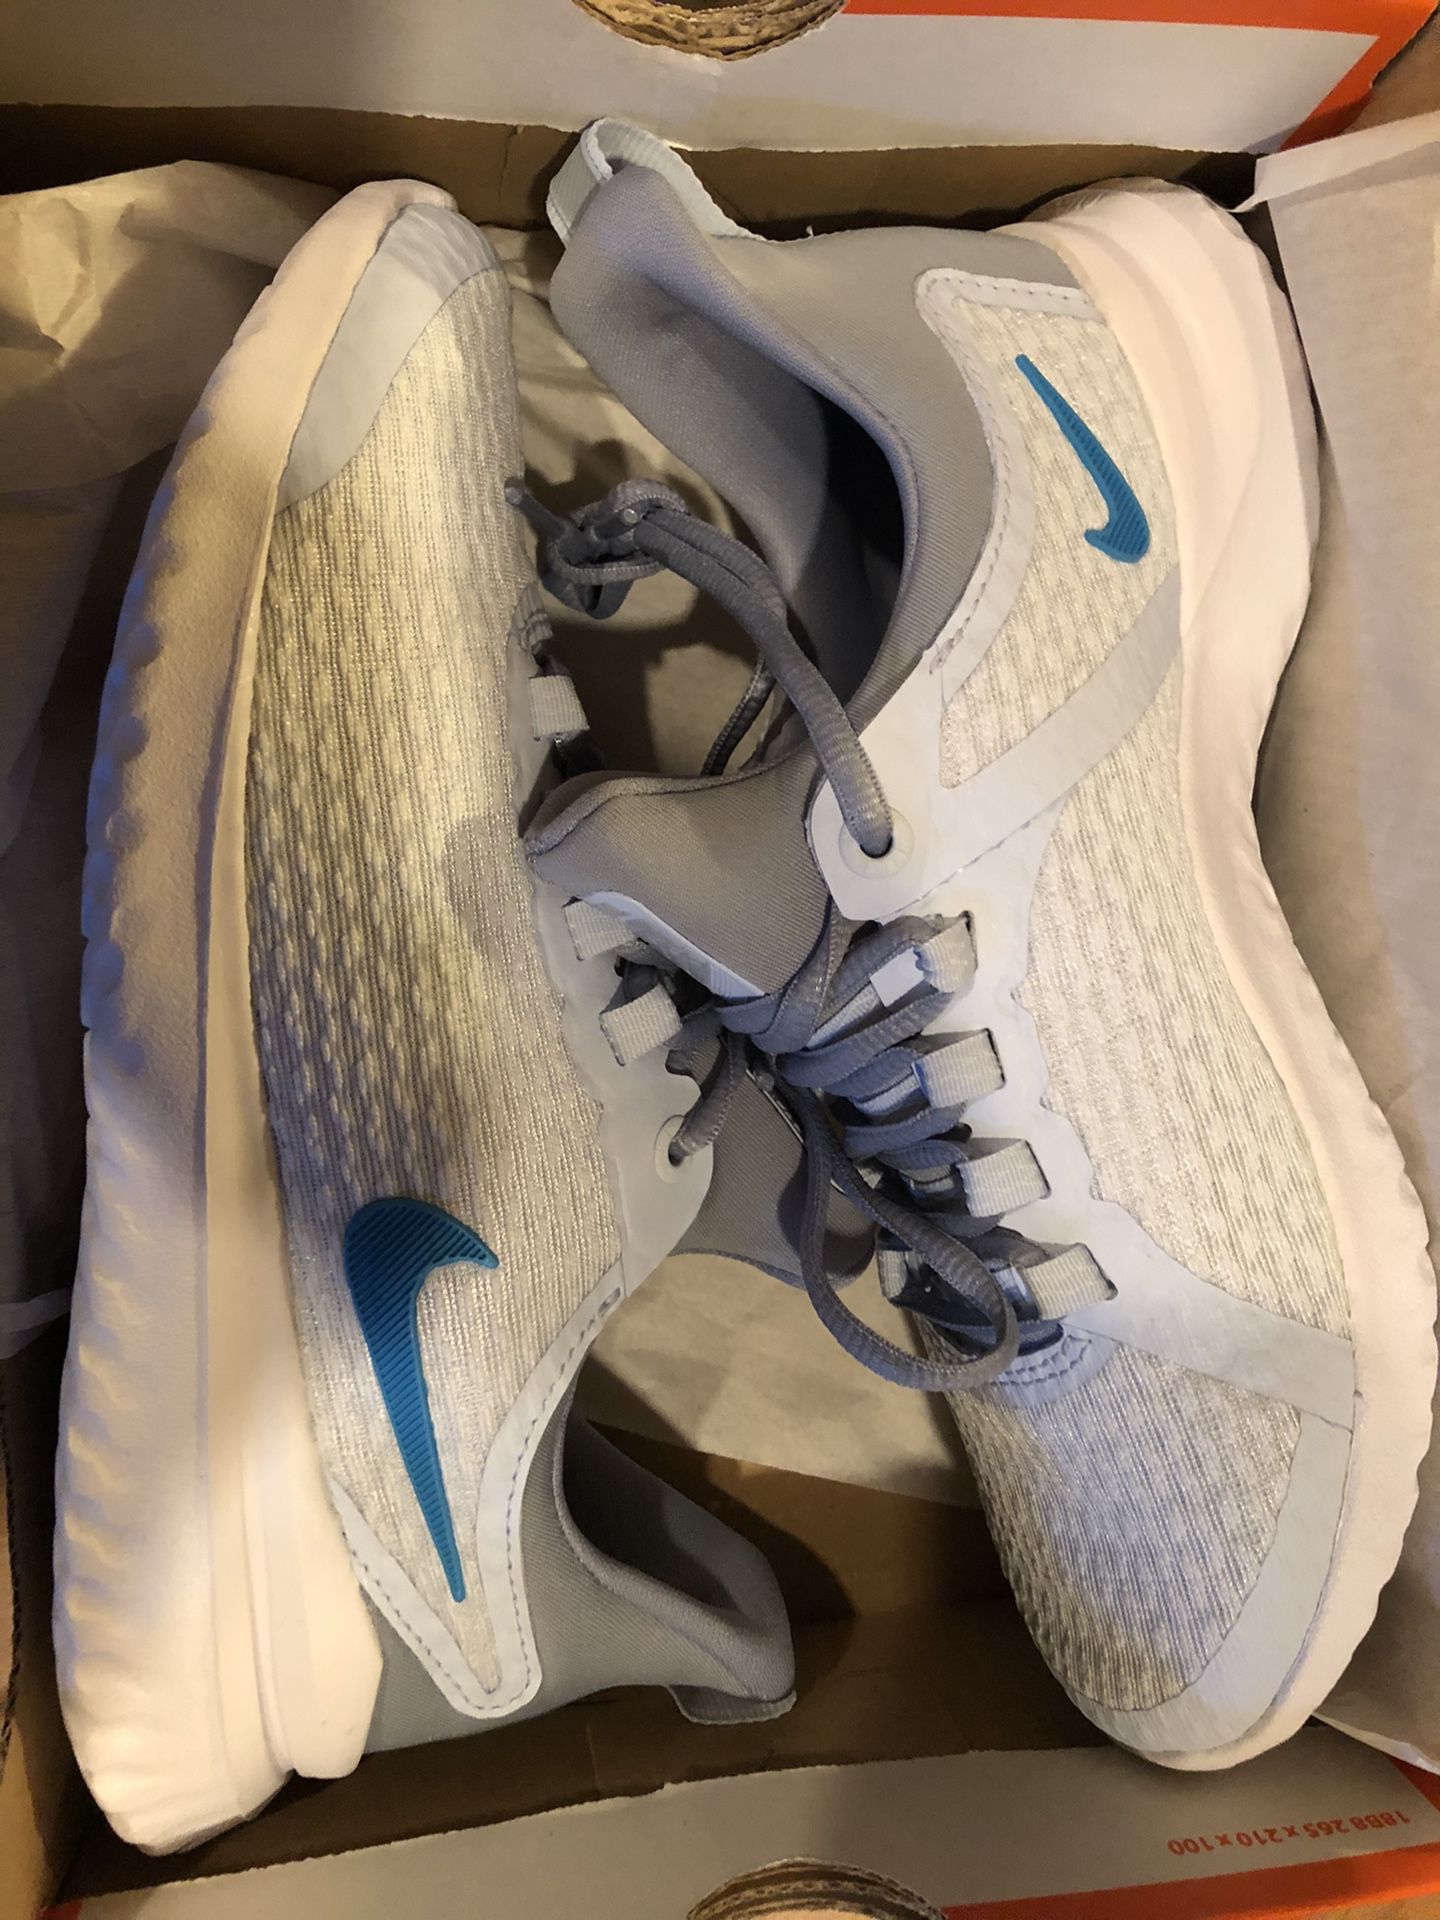 Brand new in original box, Nike shoes size 4.5 youth